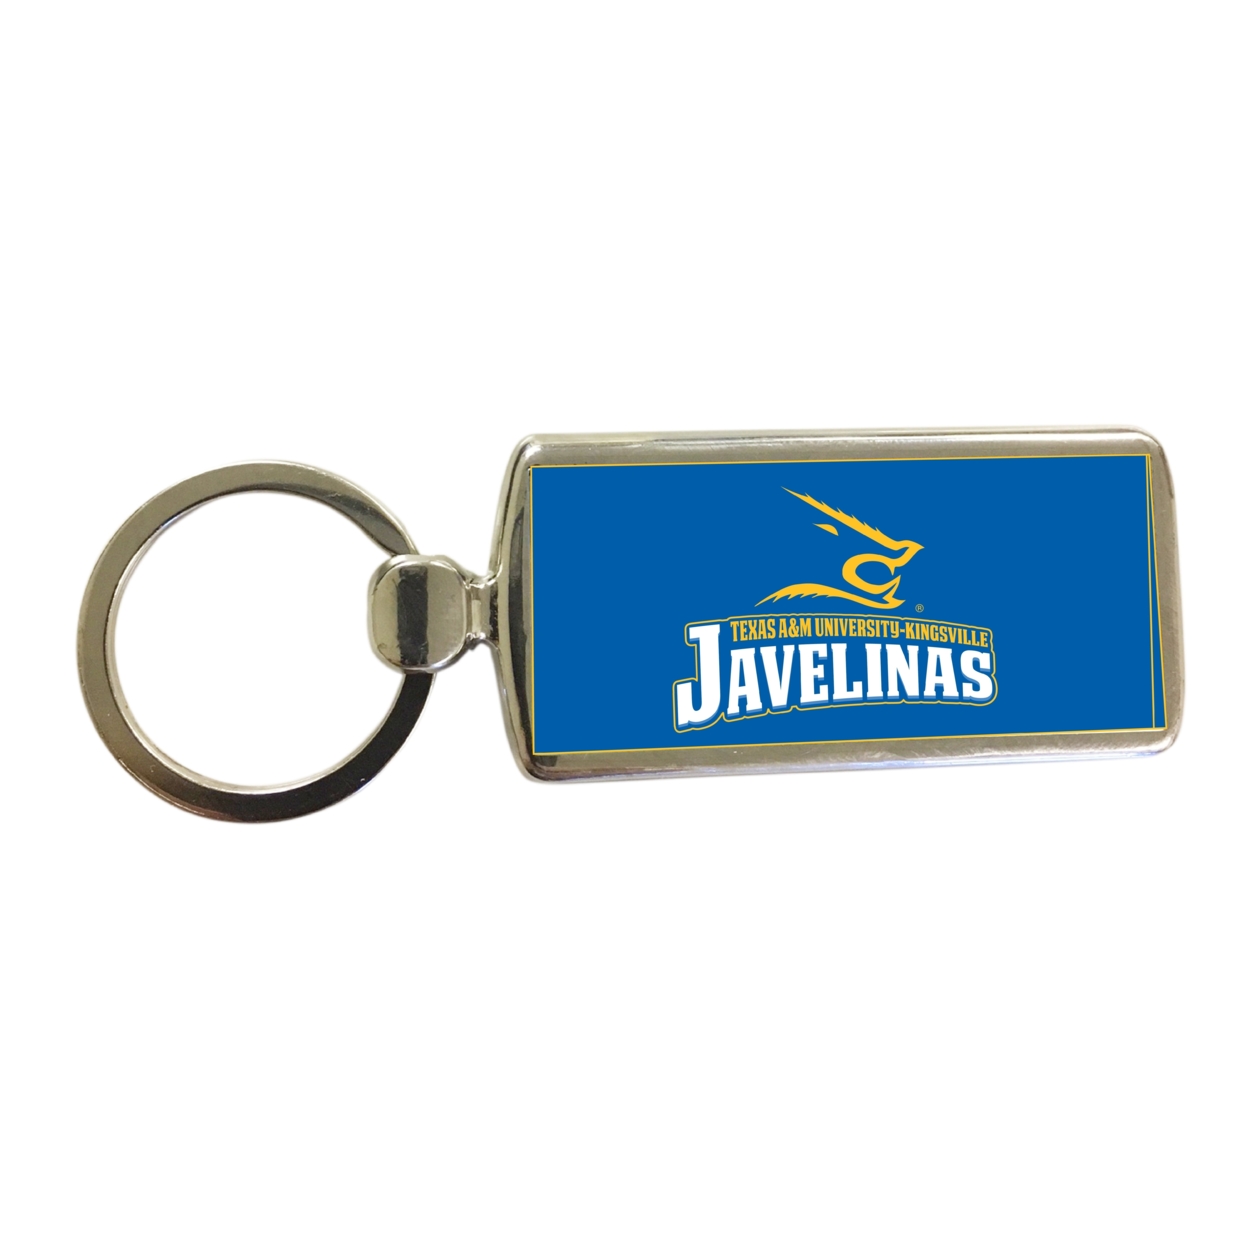 R And R Imports Texas A&M Kingsville Javelinas Metal Keychain